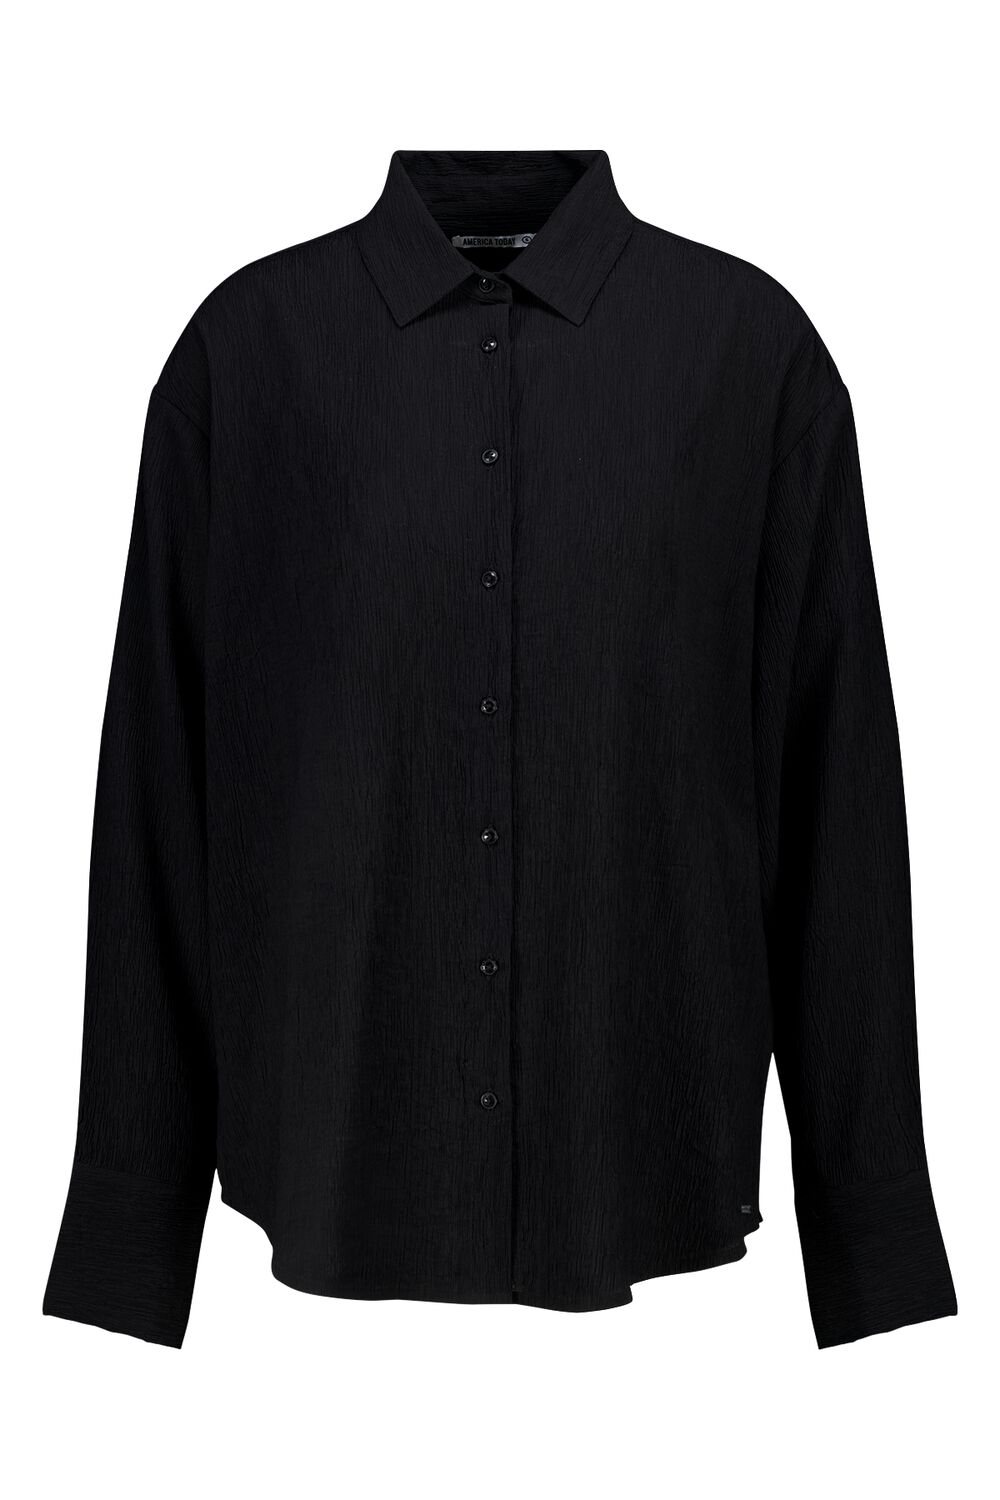 America Today Blouse billy